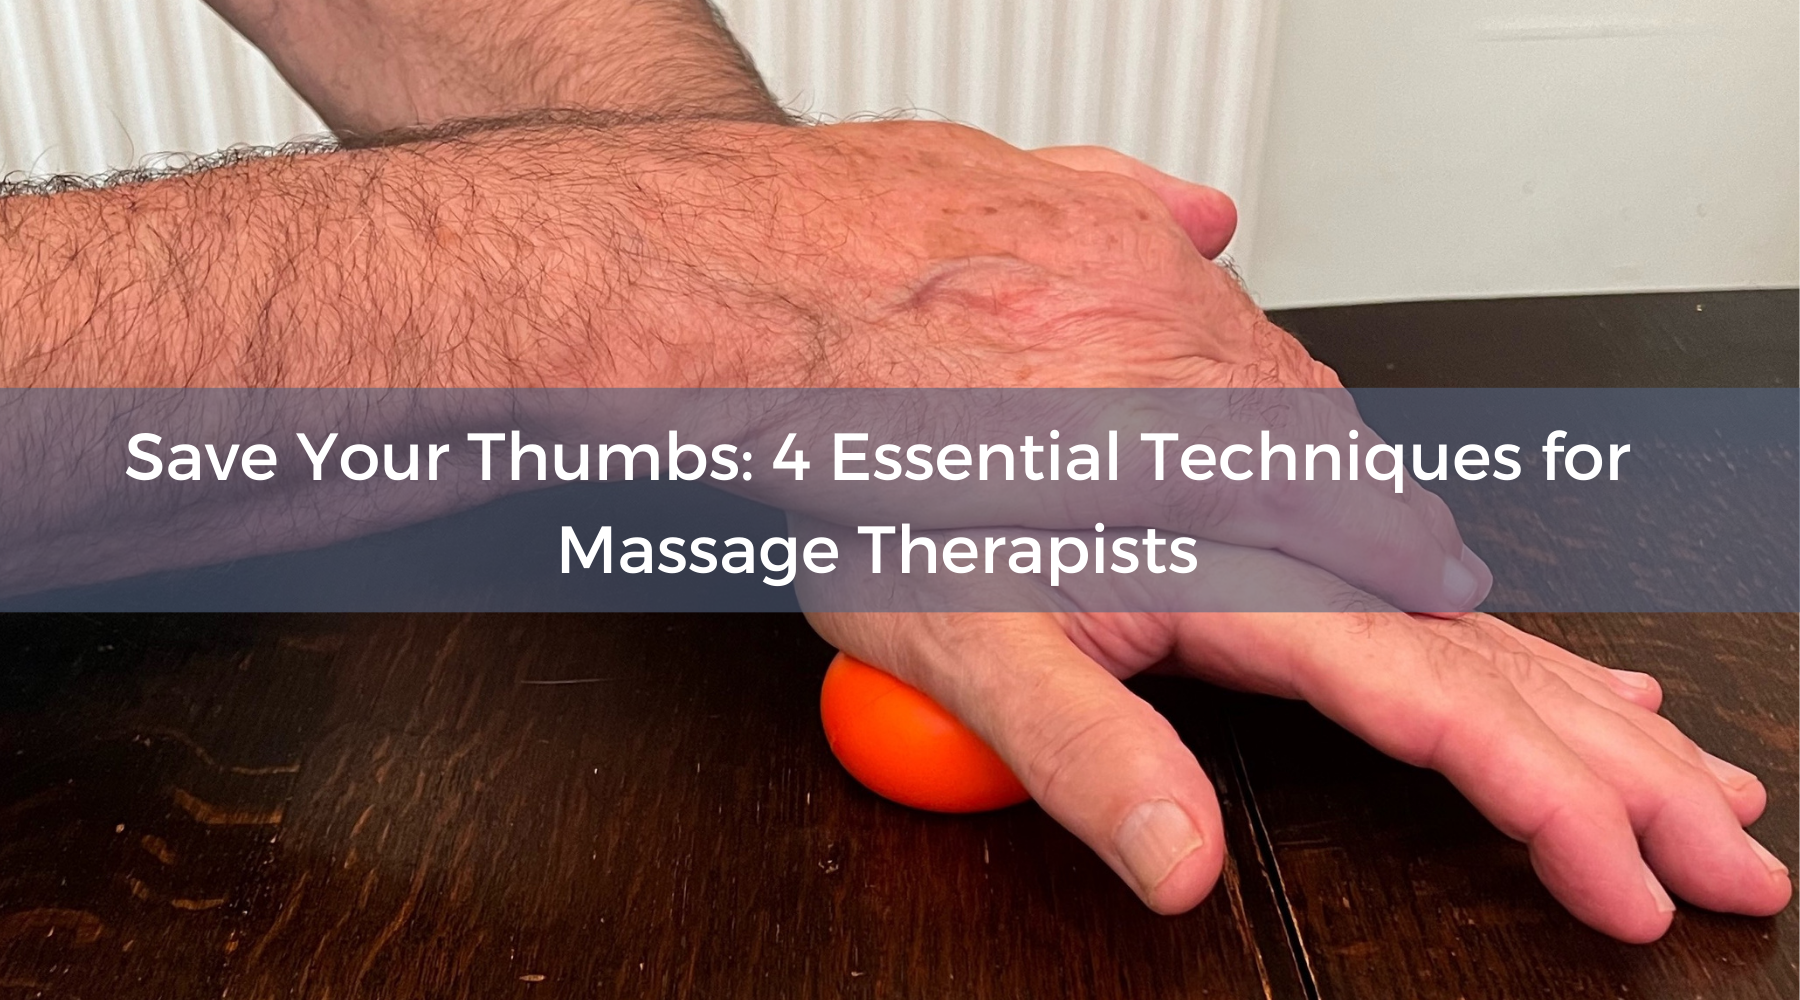 Thumb-Saving Techniques: 4 Ways to Protect Your Thumbs in Massage Therapy